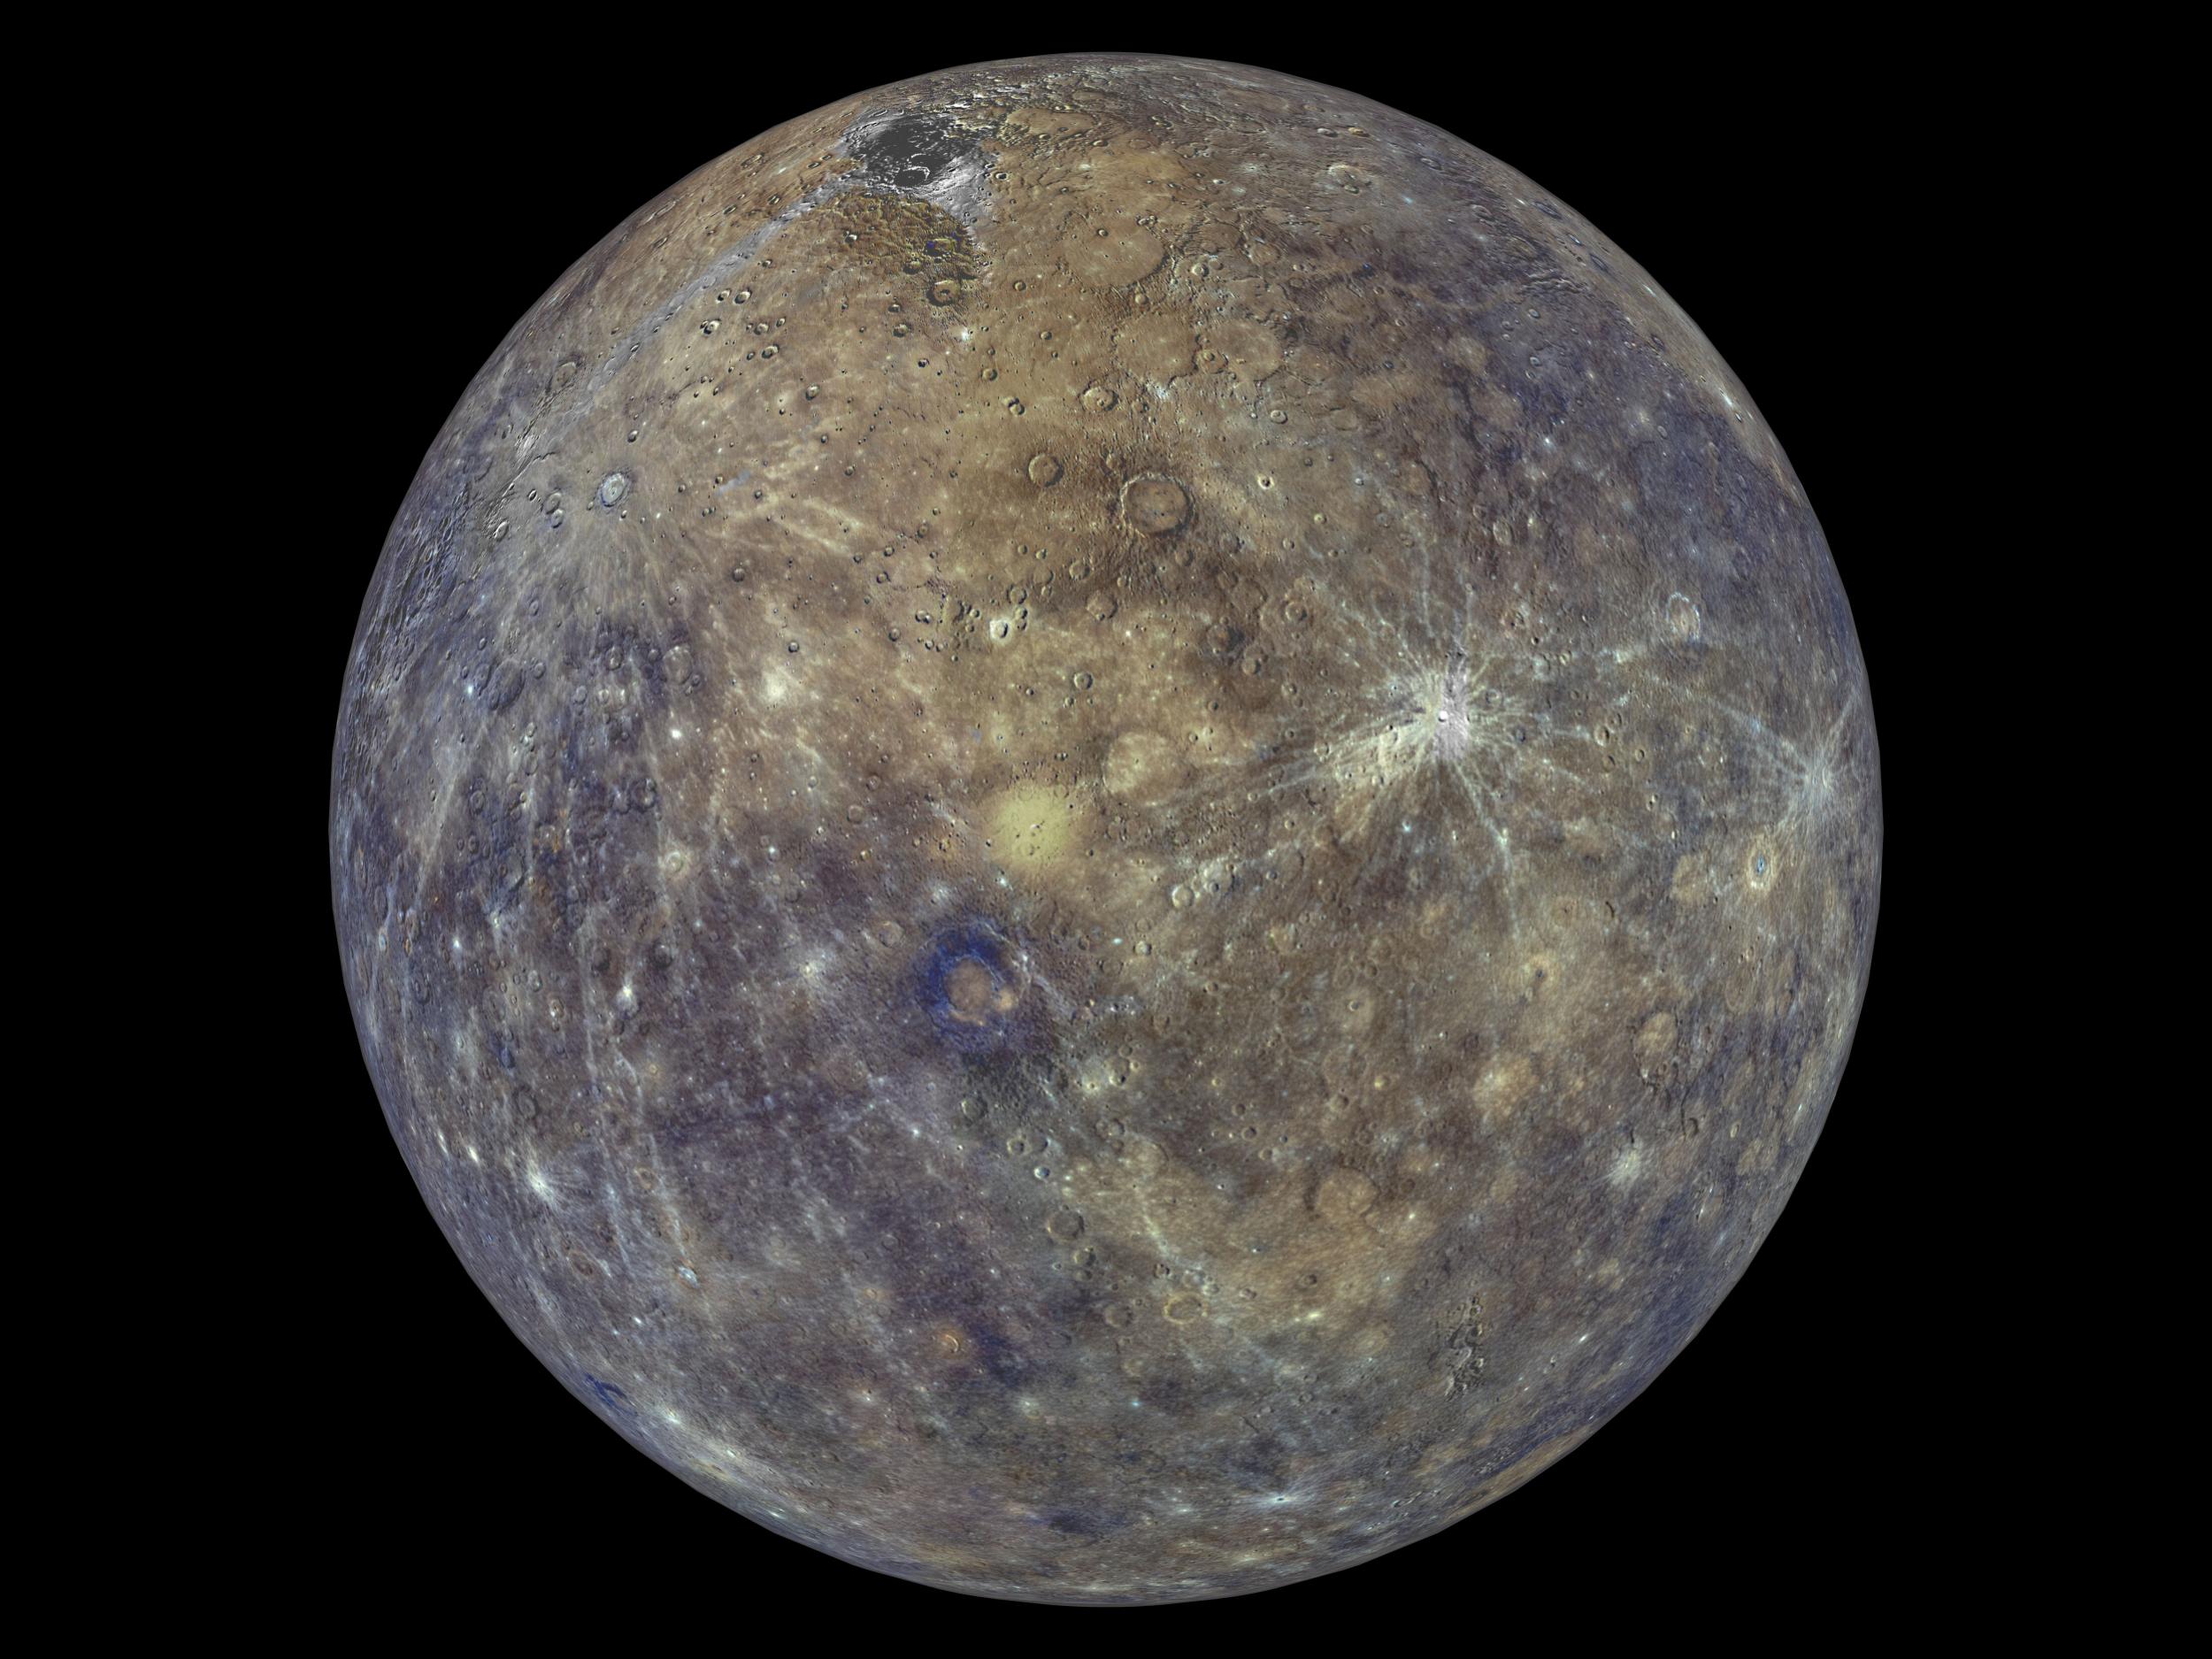 Stargazing in November: Mercury to cross the face of the sun for last time in 13 years